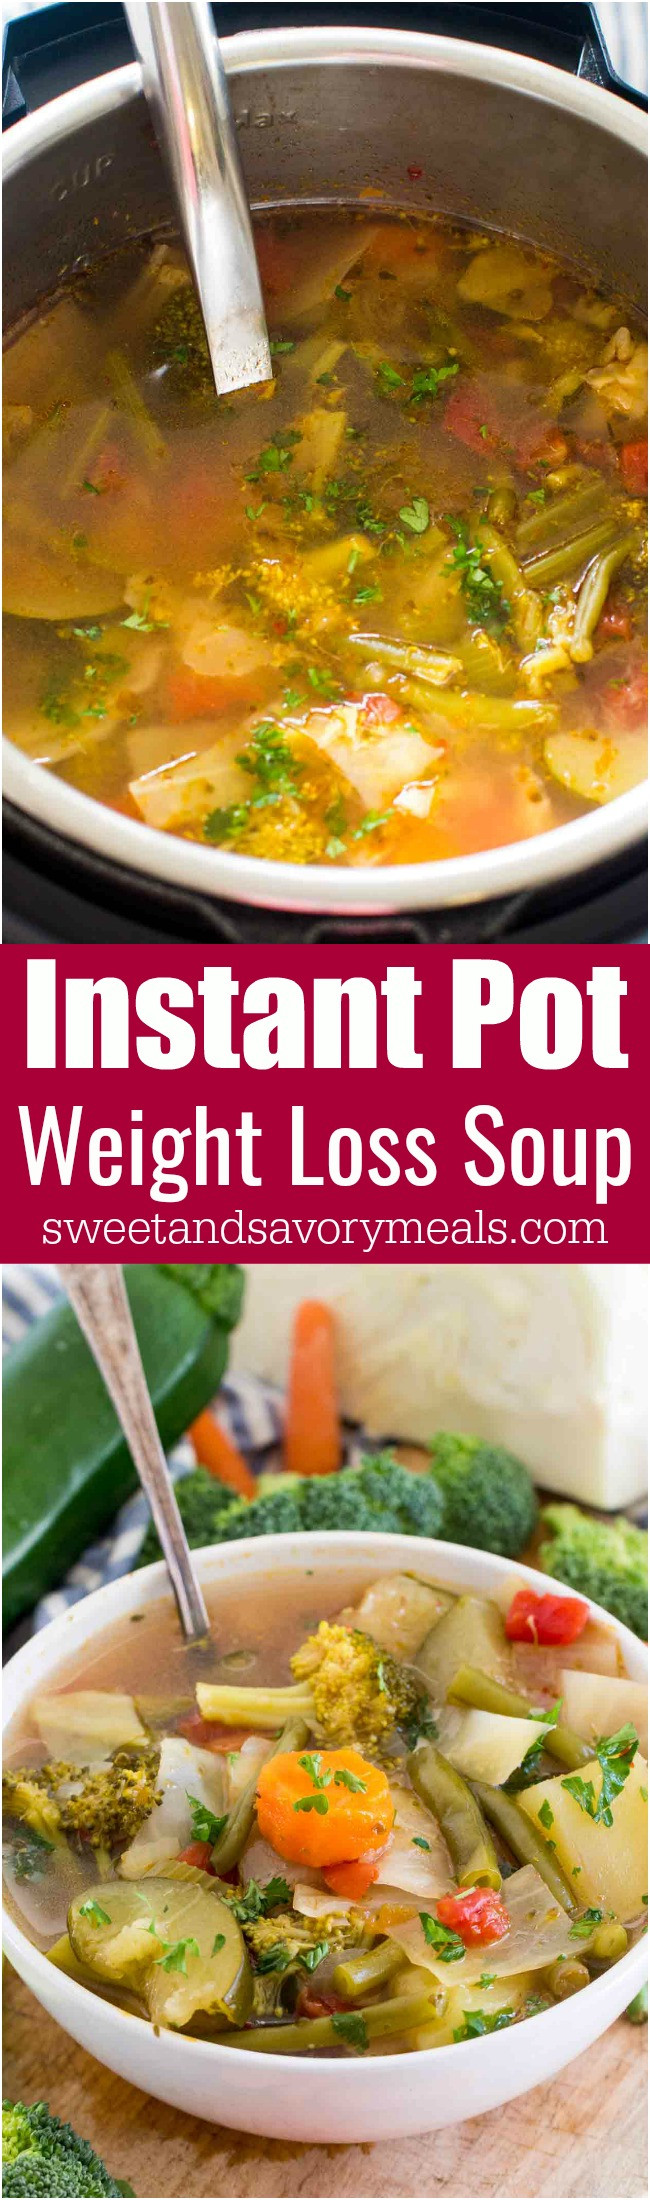 Instant Pot Recipes For Weight Loss
 Instant Pot Weight Loss Soup Sweet and Savory Meals